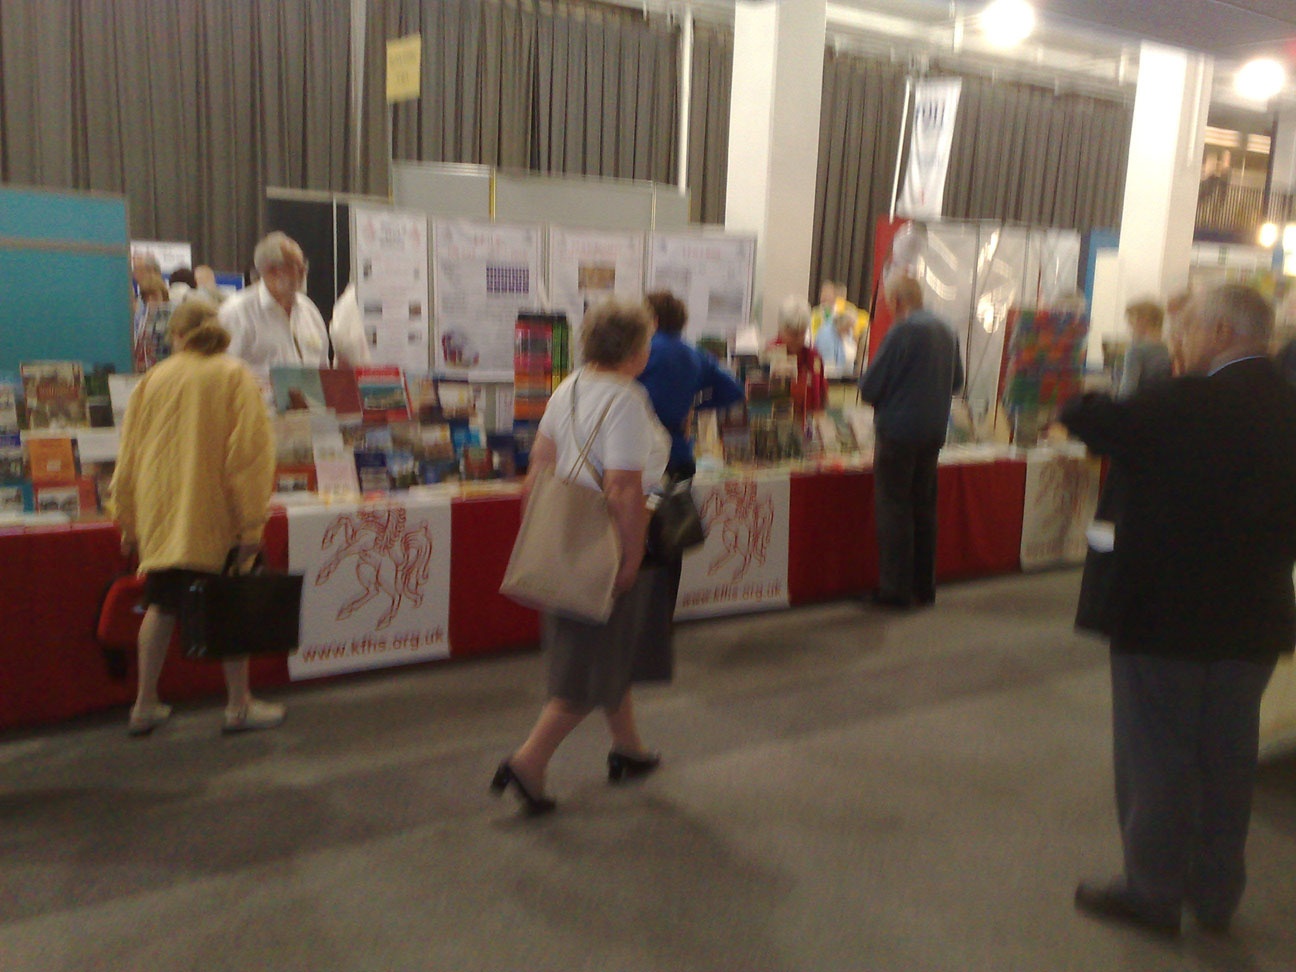 The Kent FHS stall